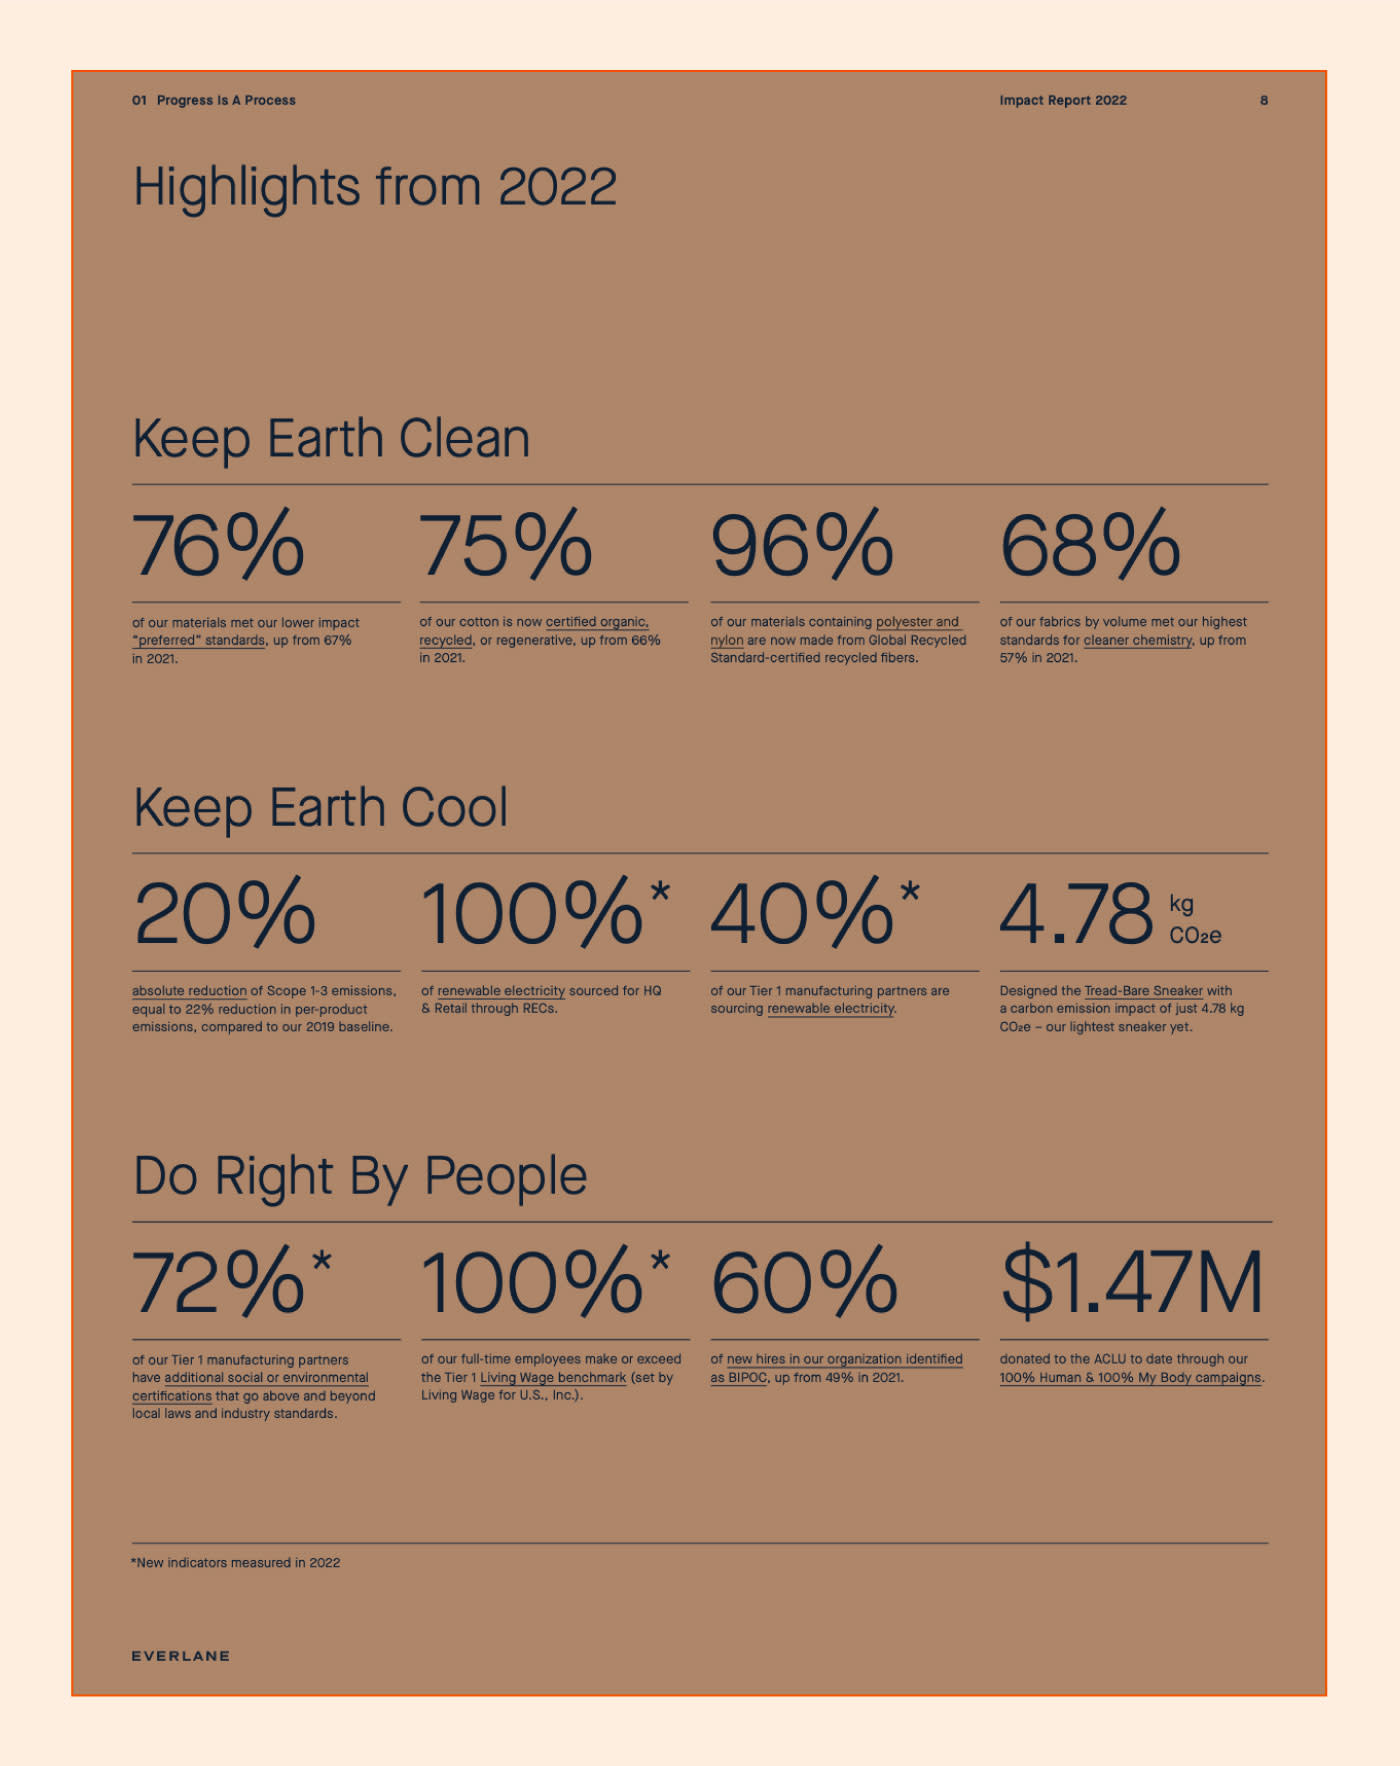 A snippet of Everlane's impact report from 2022, showing its use of donut charts to visualize company data